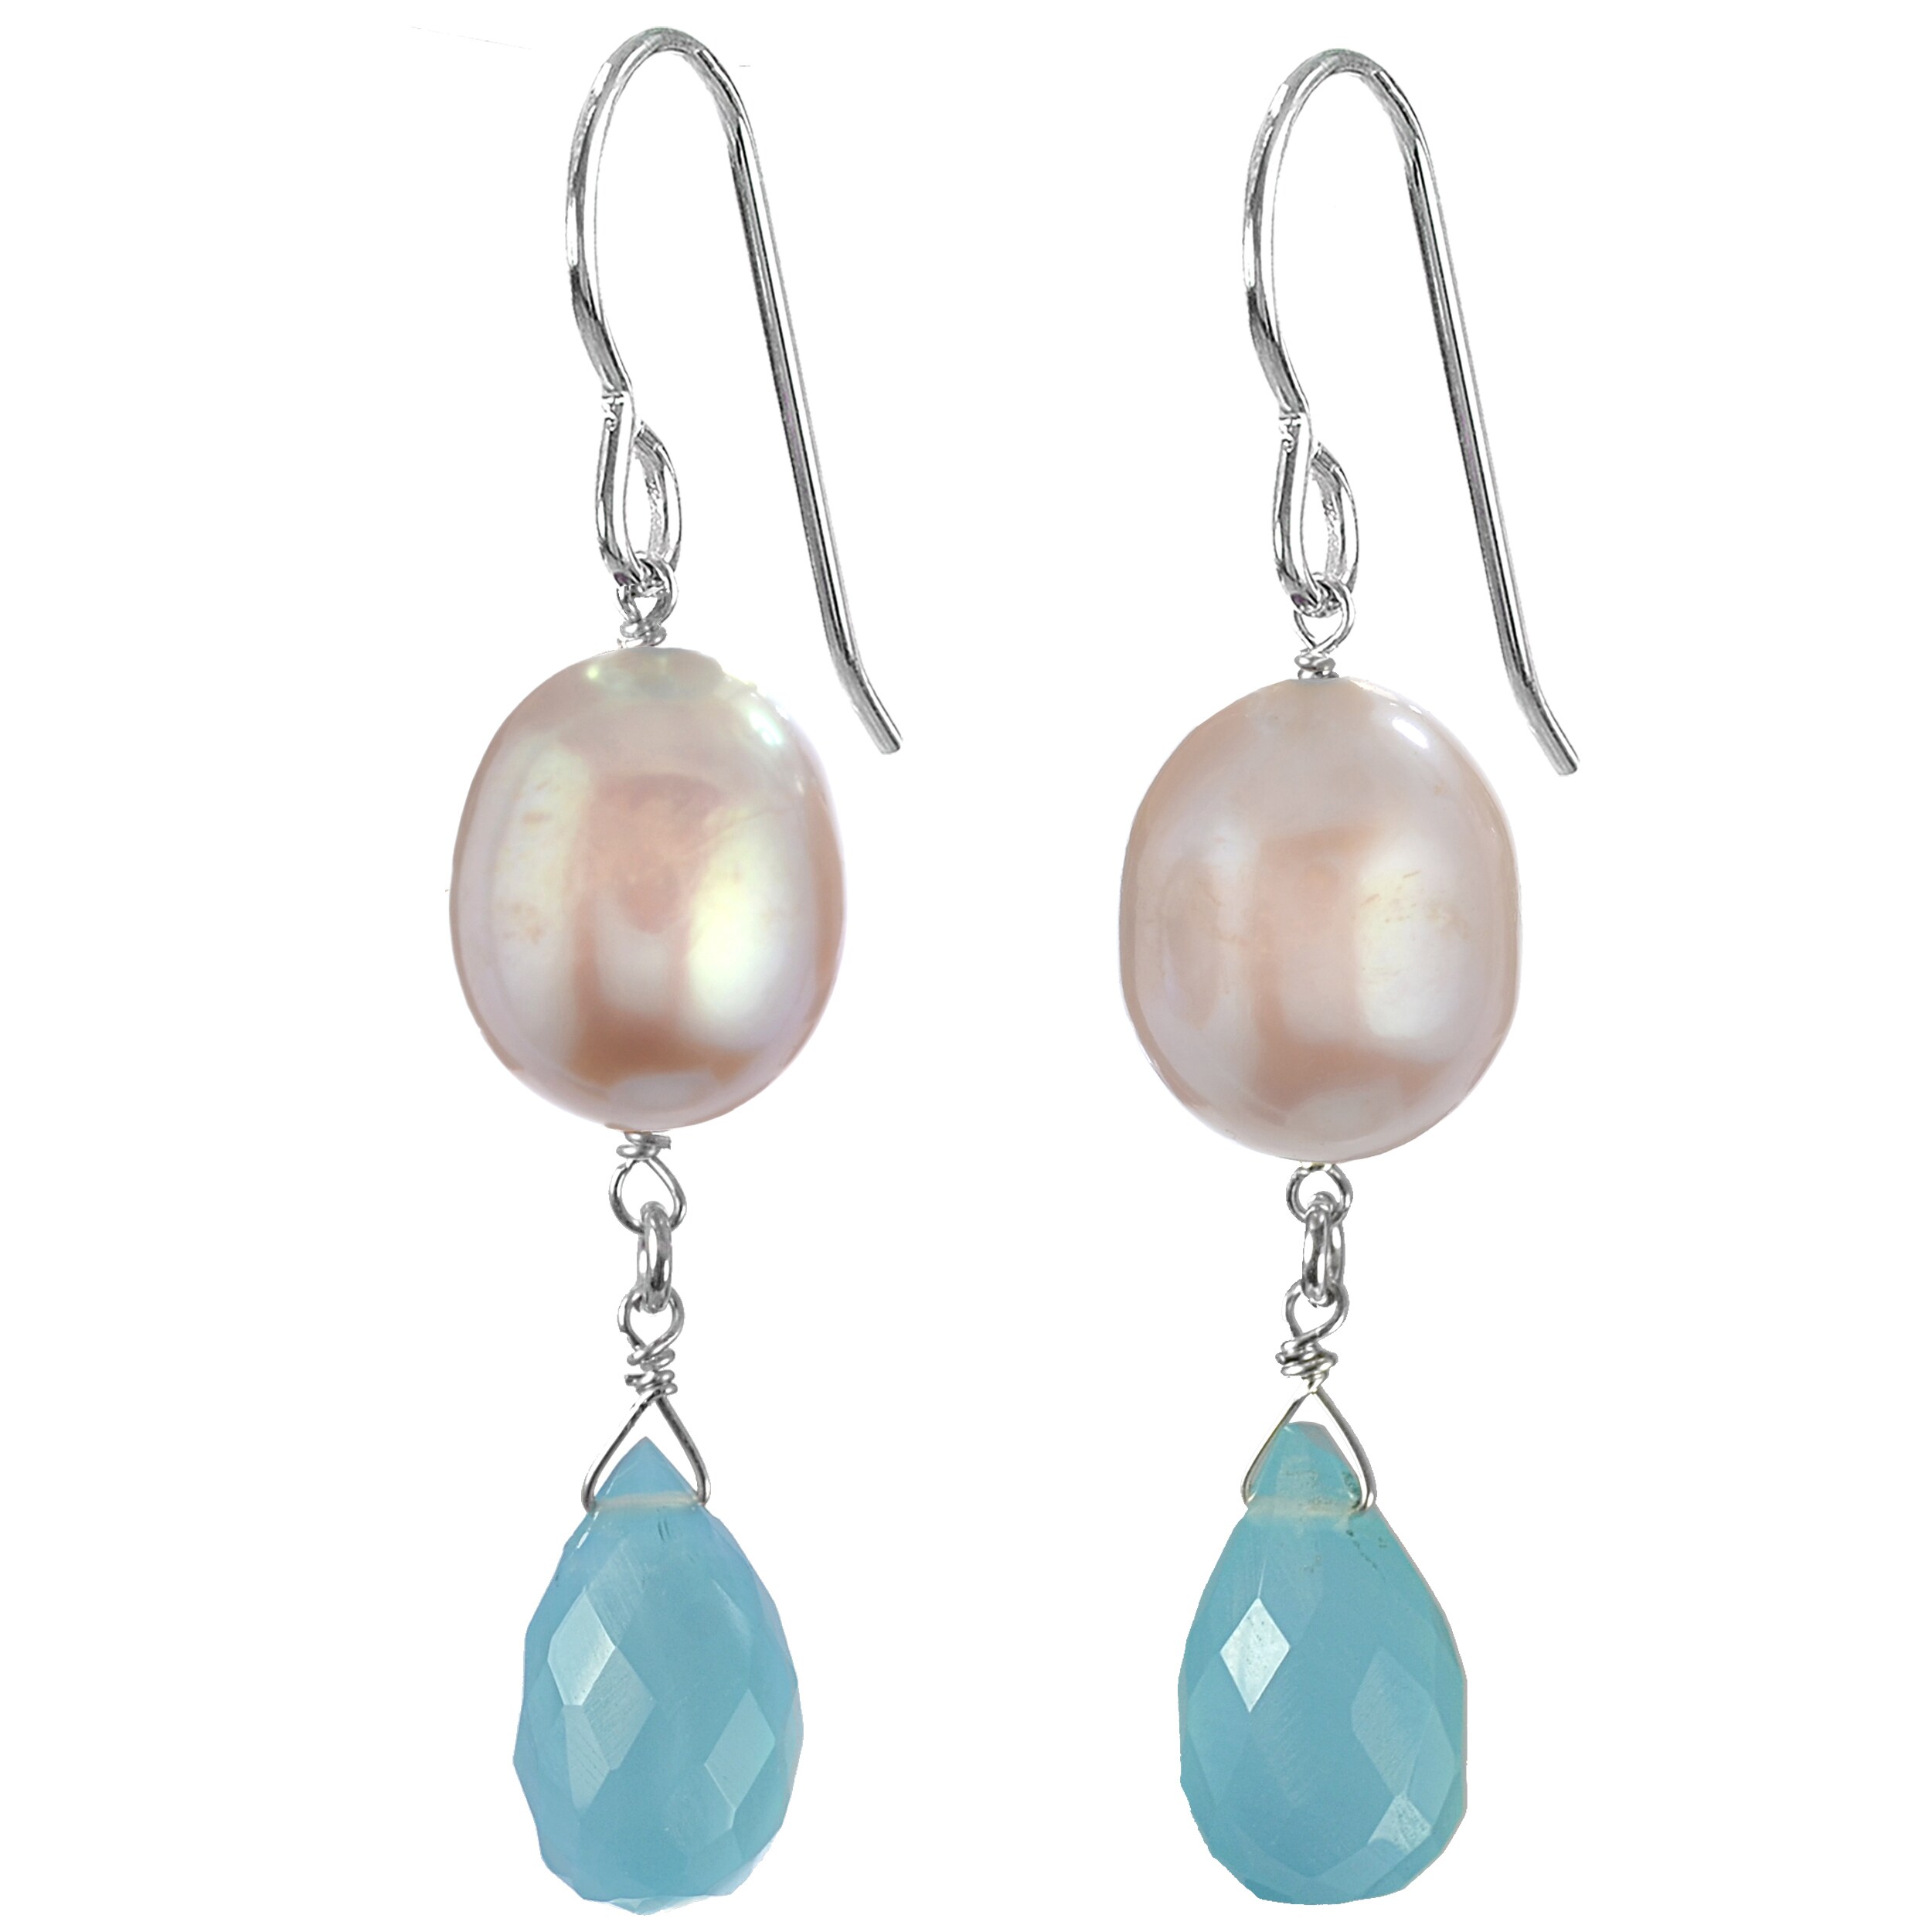 Delicate Freshwater Pearl and Soft Blue Chalcedony Earrings